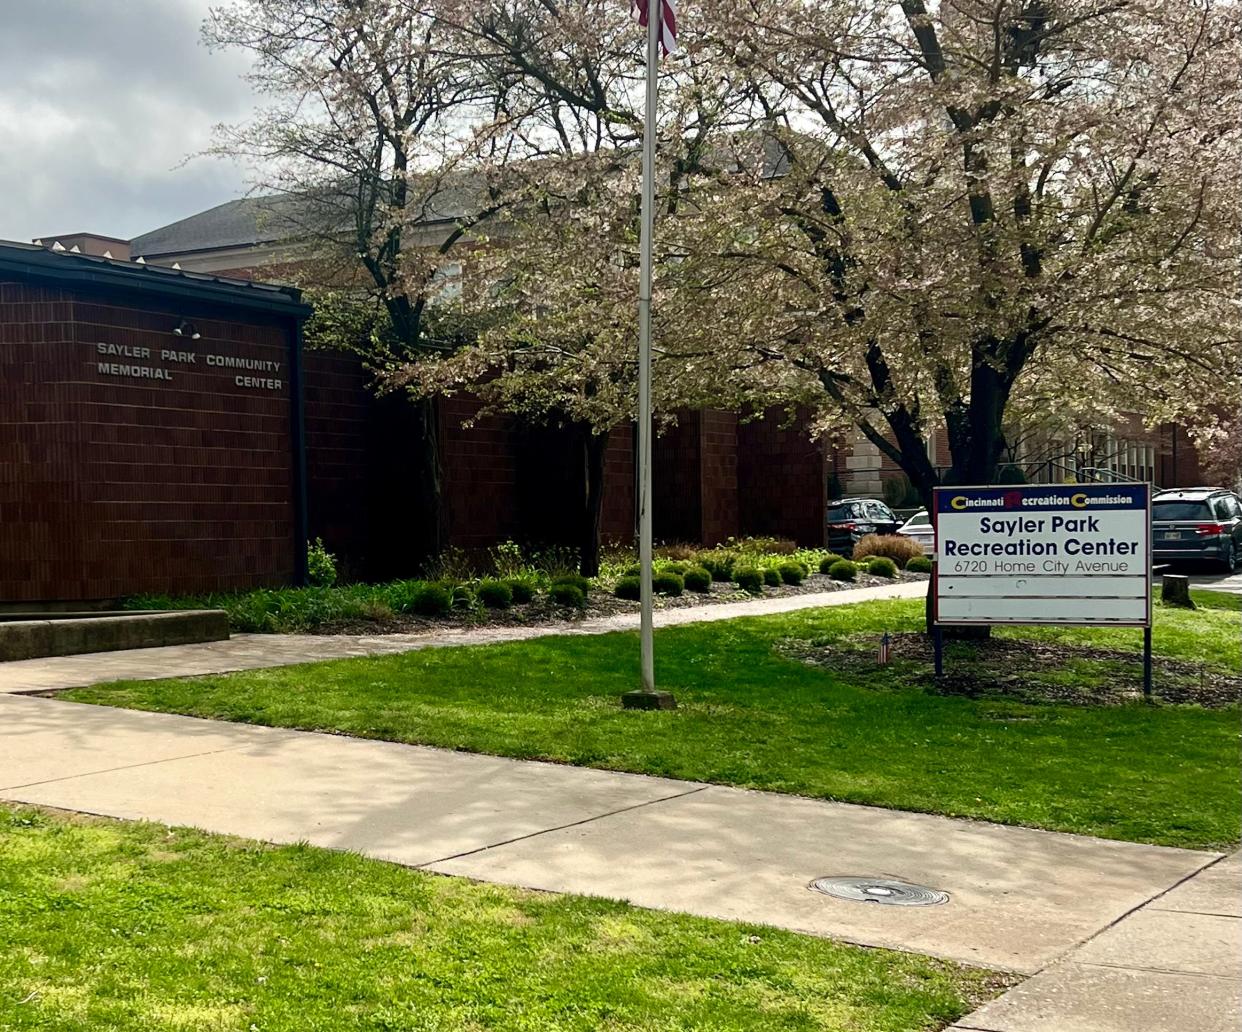 Sayler Park Recreation Center is shown here. An an employee at the center was fired in December and charged with misdemeanor child endangering after an incident with a child resulted in the child falling and hitting his head.